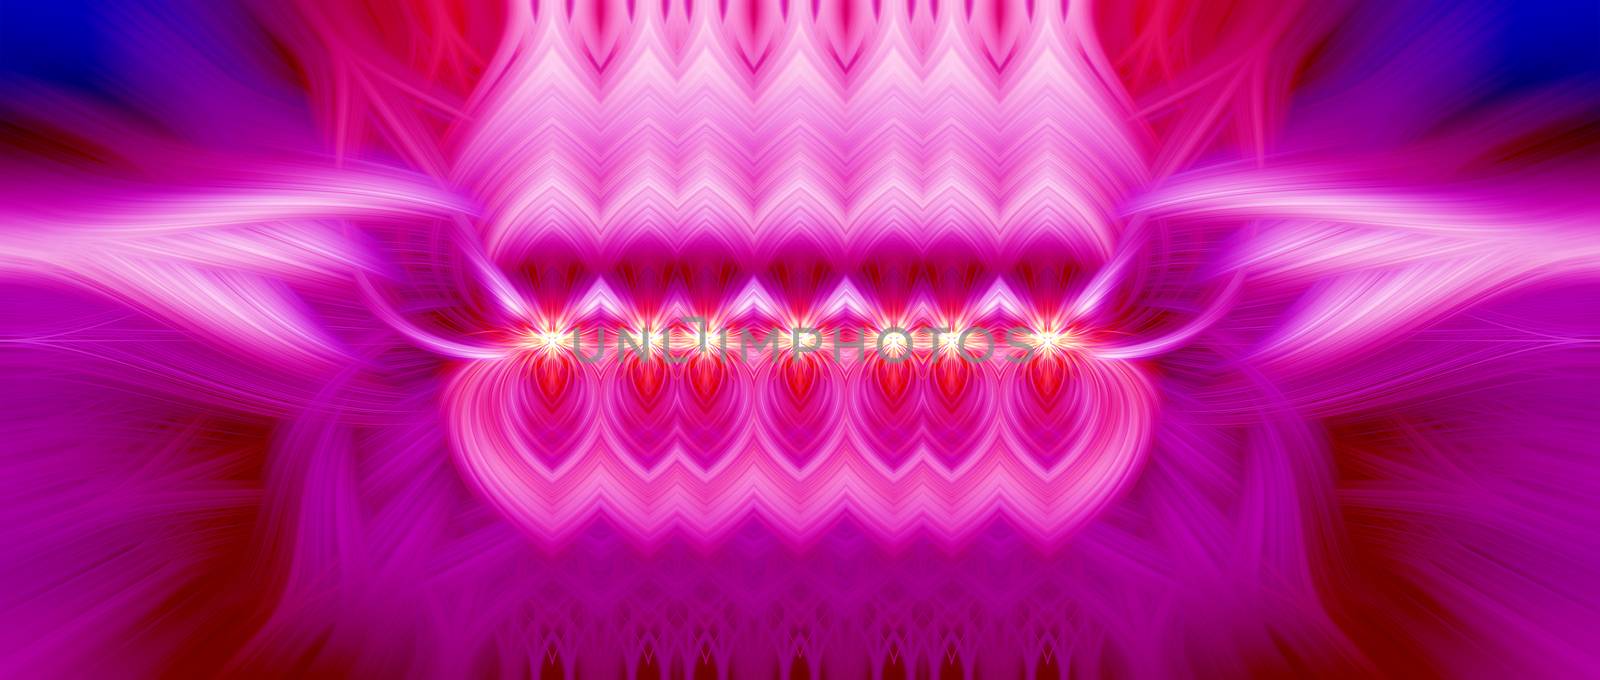 Beautiful abstract intertwined 3d fibers forming a shape of sparkle, flame, flower, interlinked hearts. Pink, purple, maroon, red, and blue colors. Illustration. Banner and panorama size.